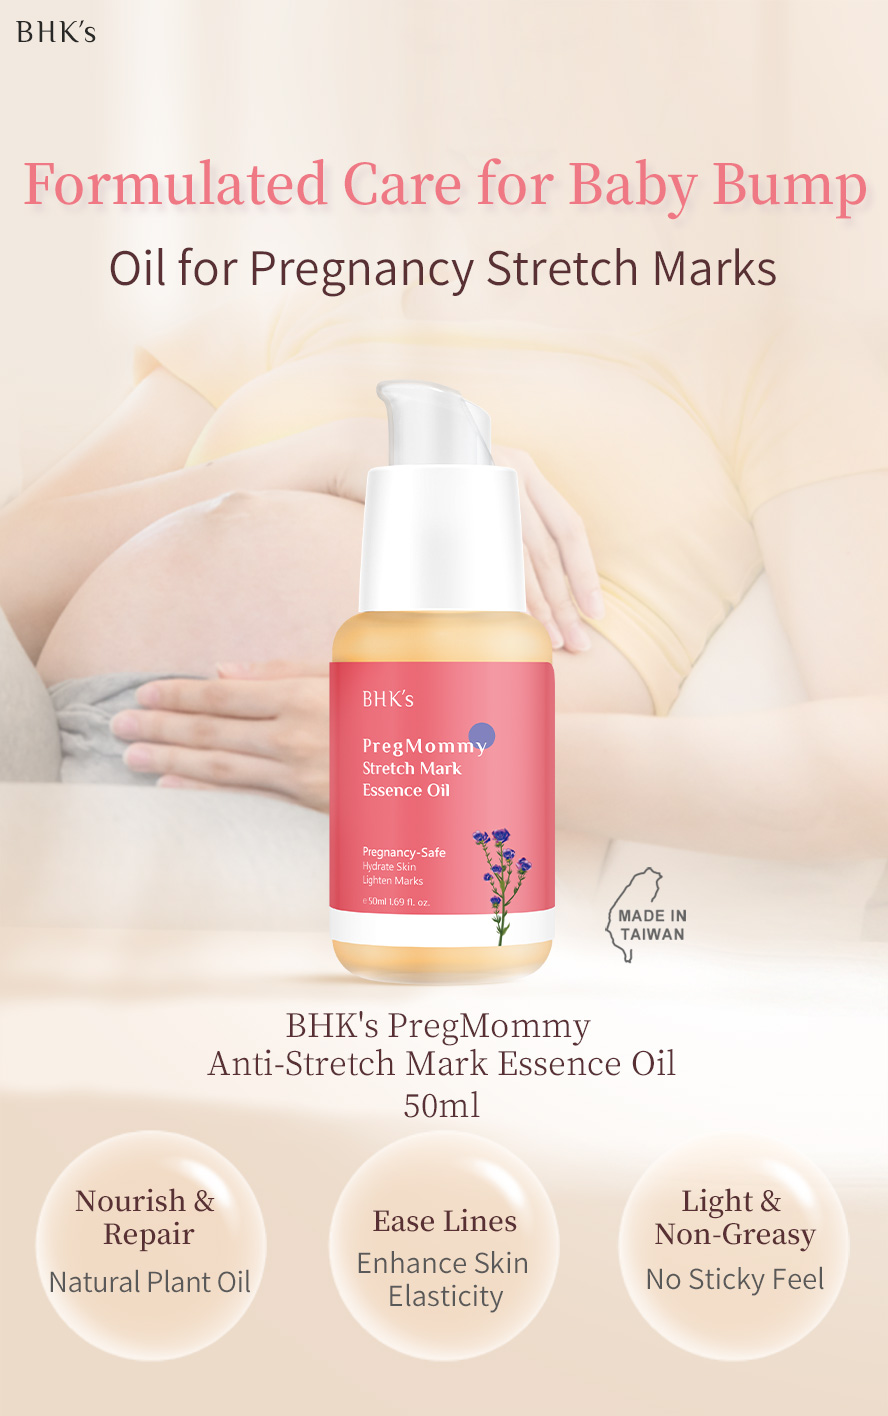 BHK's PregMommy Anti-Stretch Mark Essence Oil is a formulated baby bump care to repair skin, ease stretch marks, and enhance skin elasticity with a light and non-greasy texture.